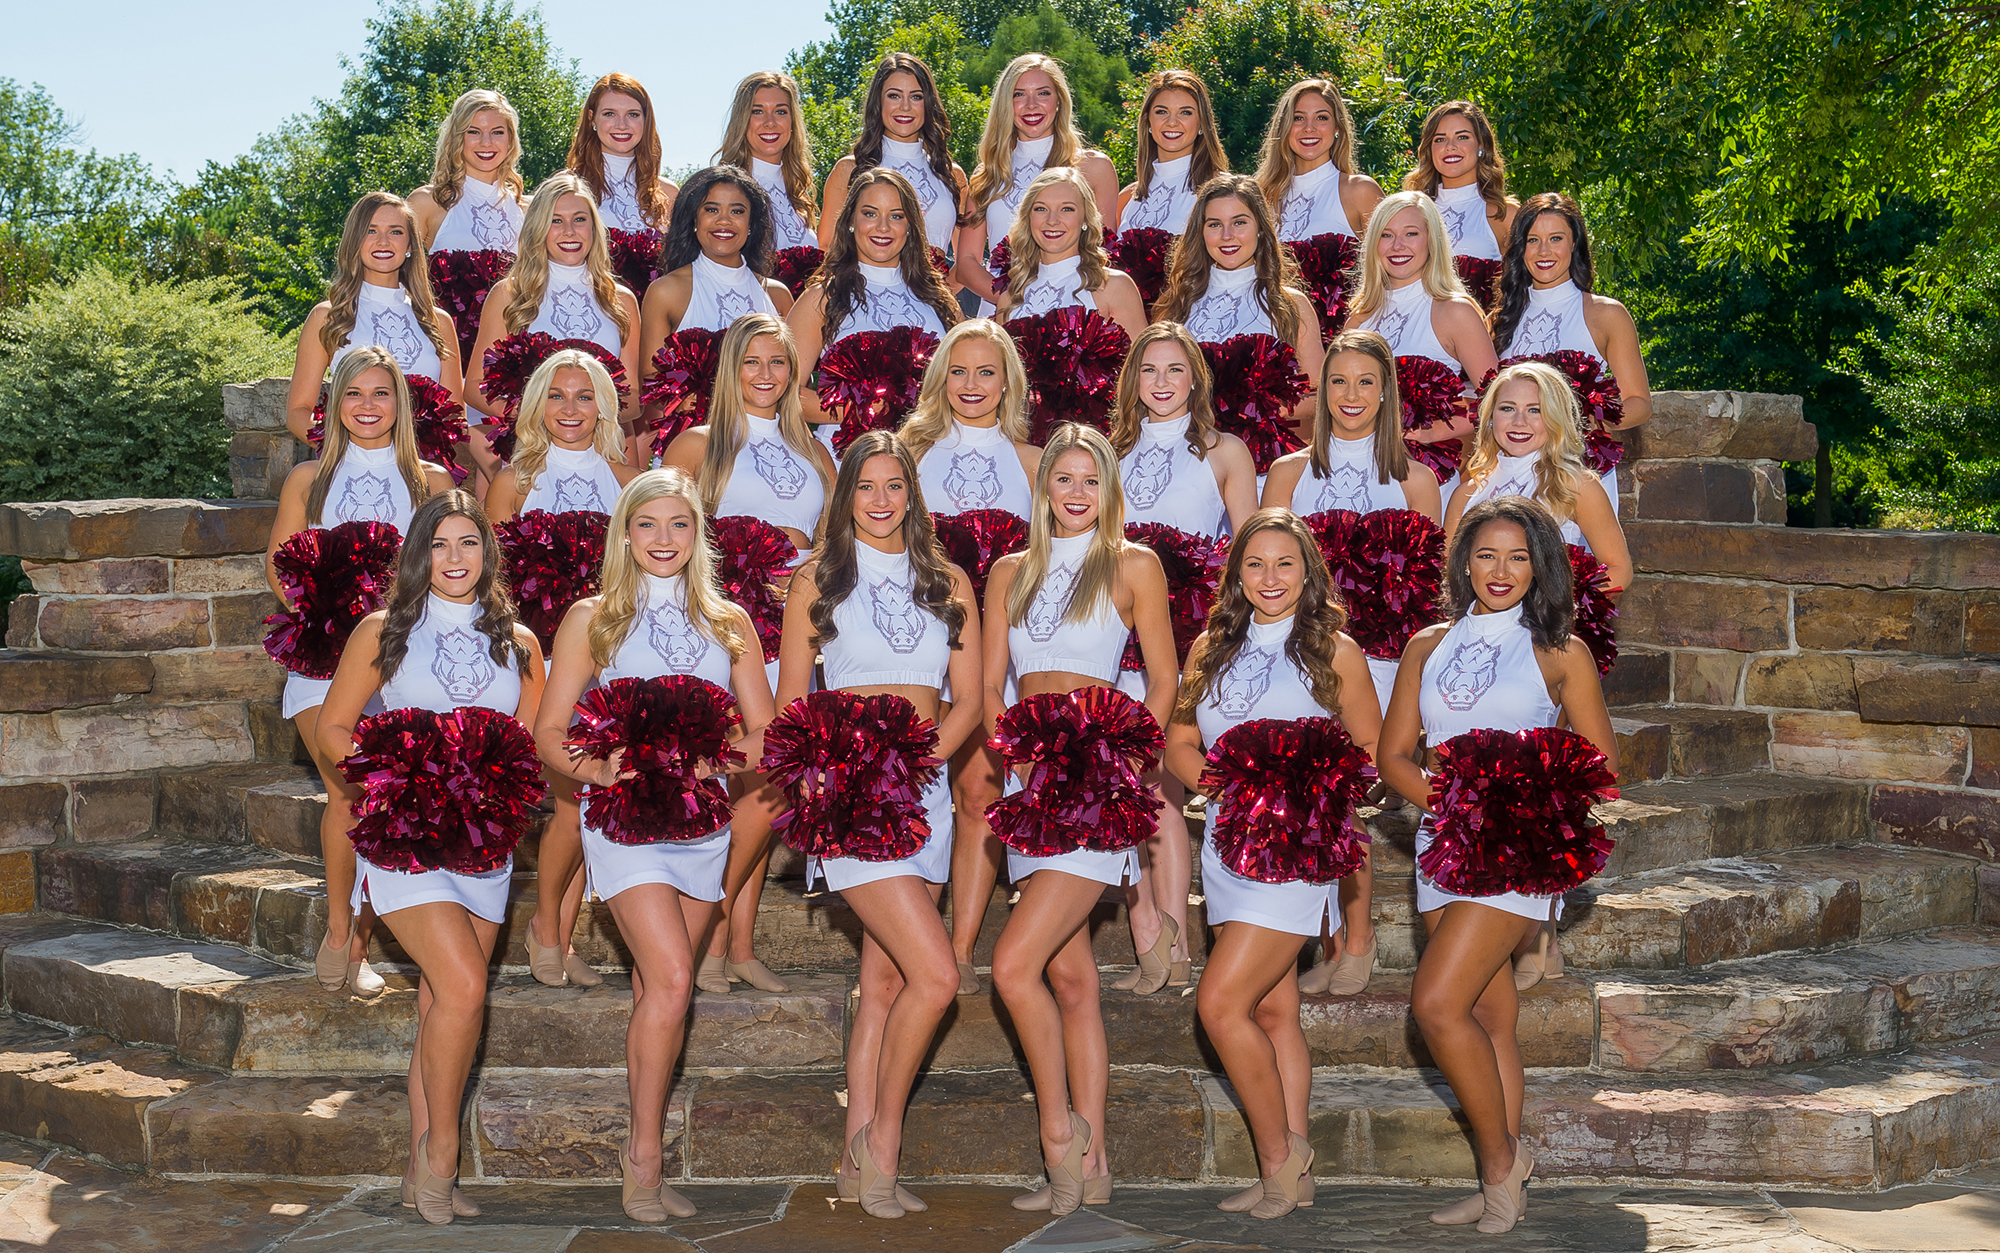 Ranking The Top Looking Cheerleaders In College Football the Sports